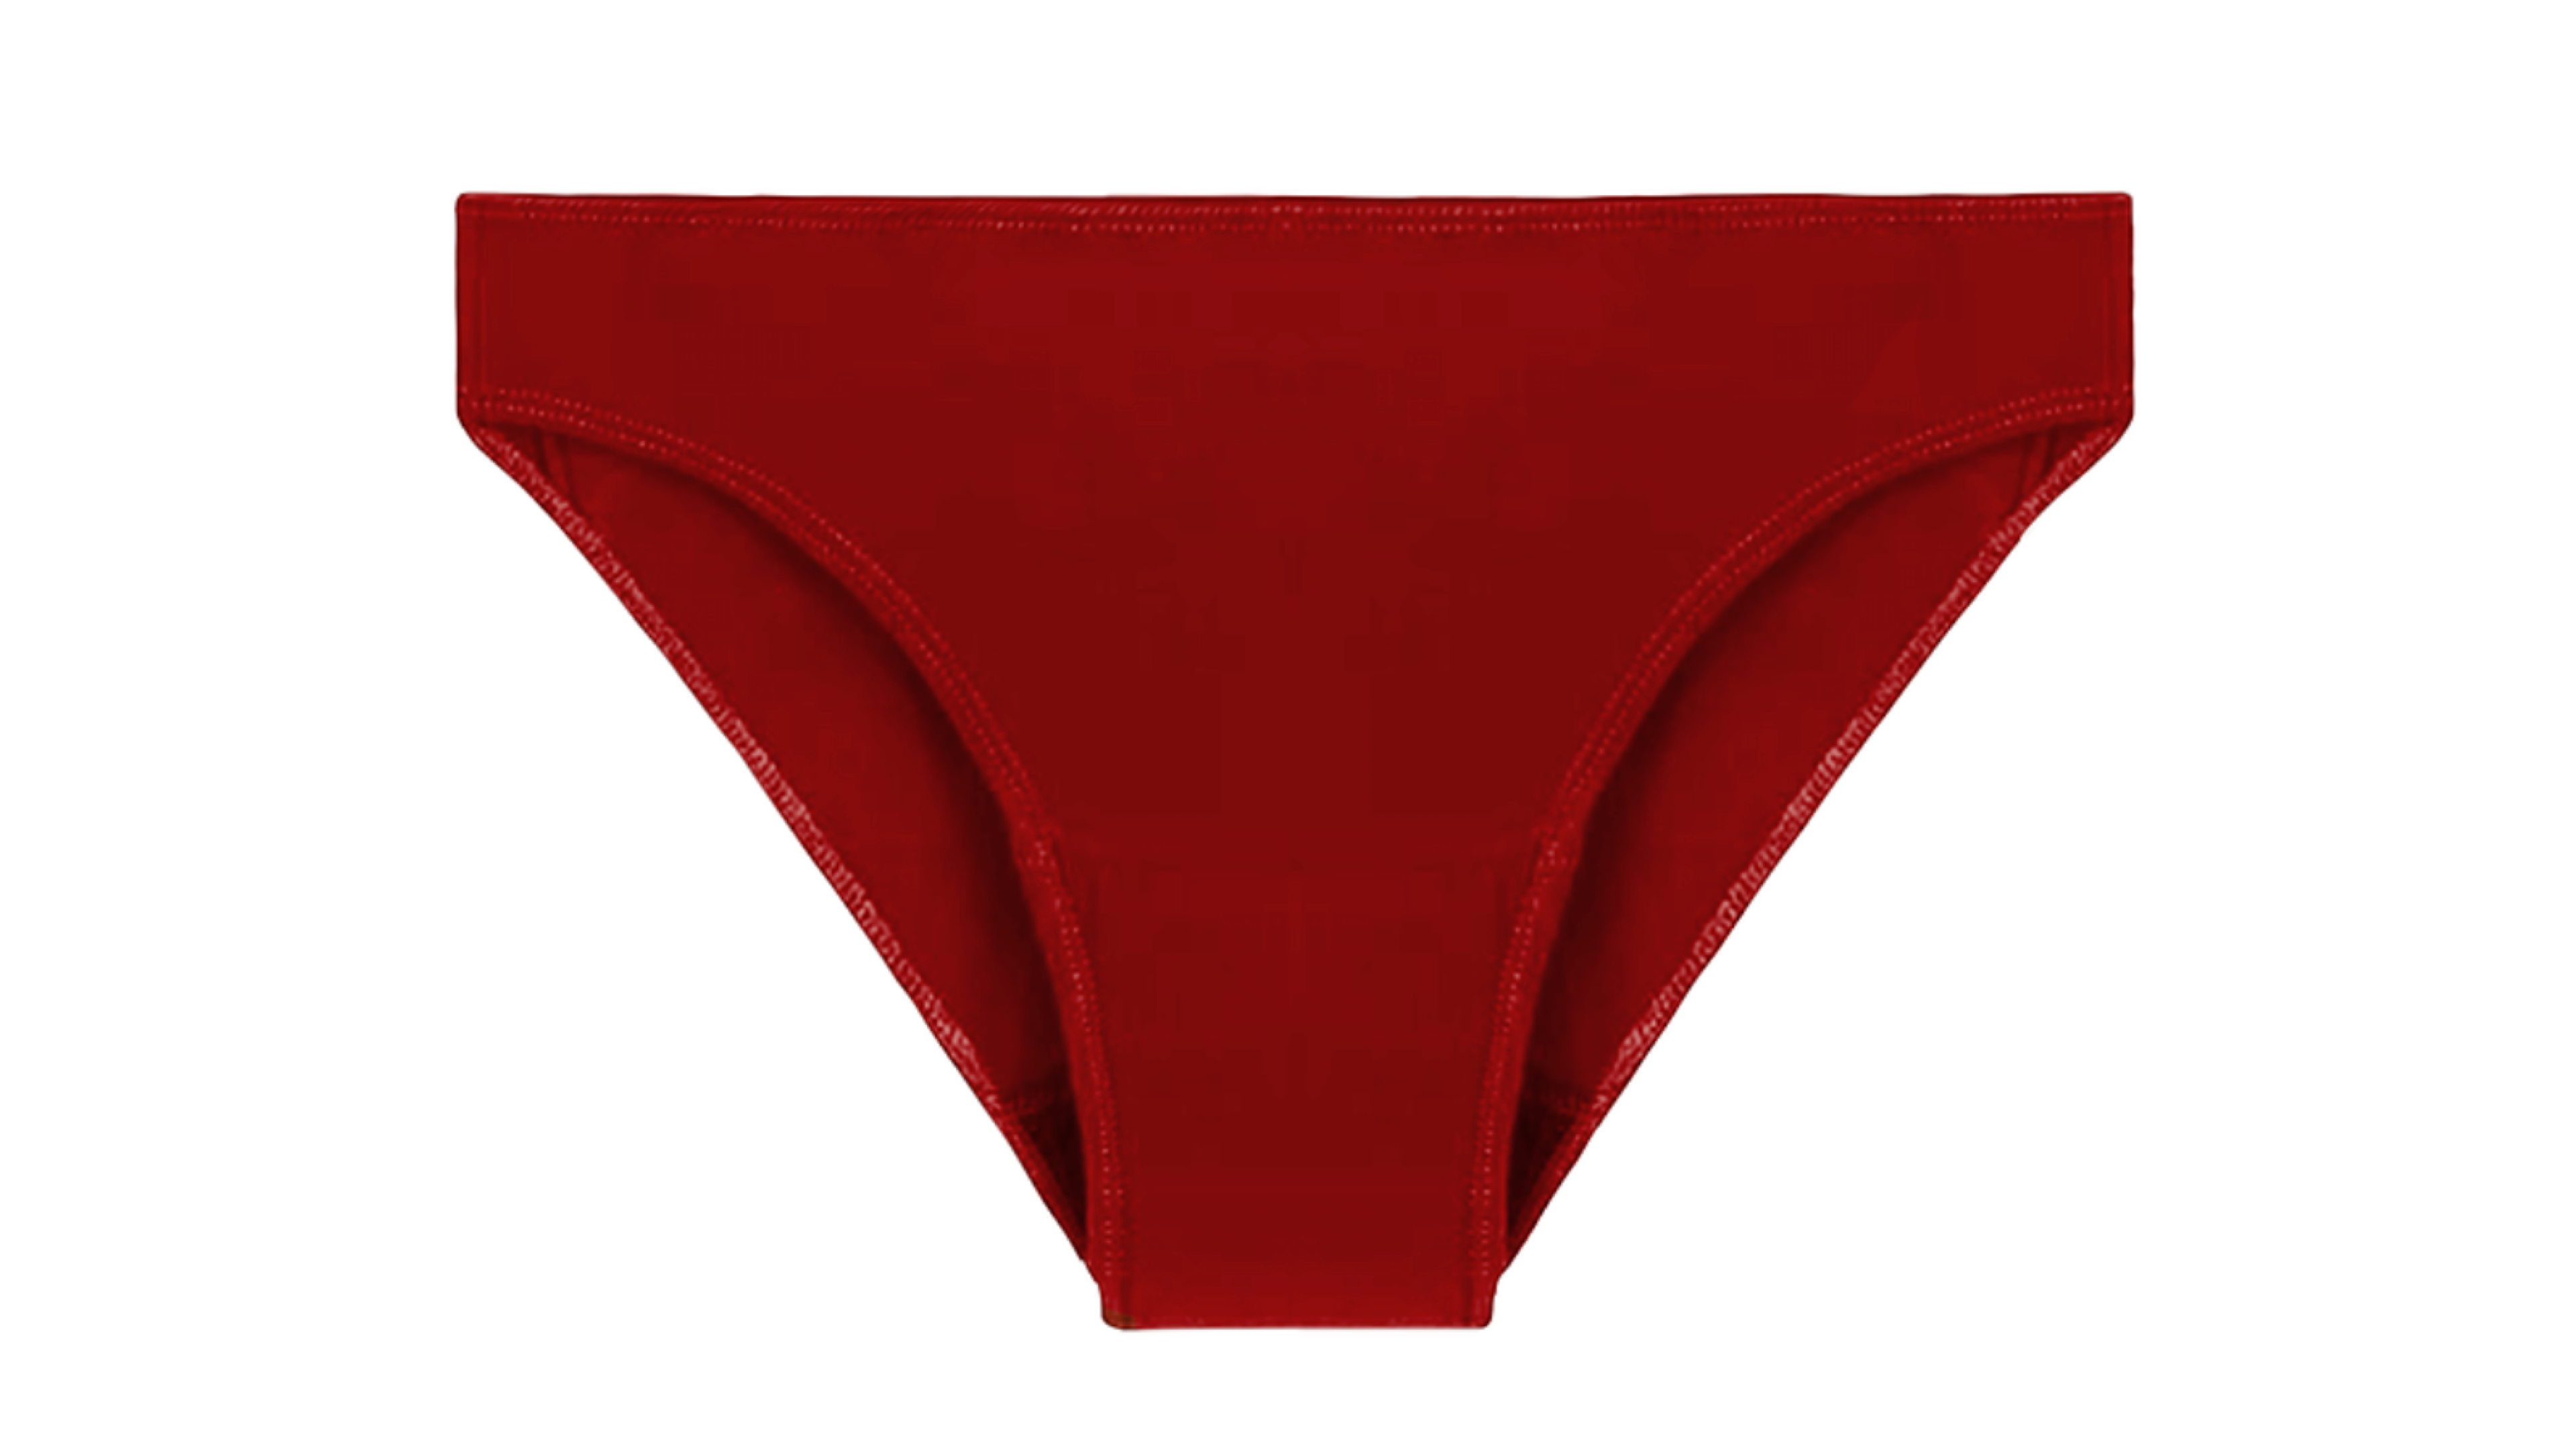 period friendly underwear that are very absorbent and can be worn without pads or tampons